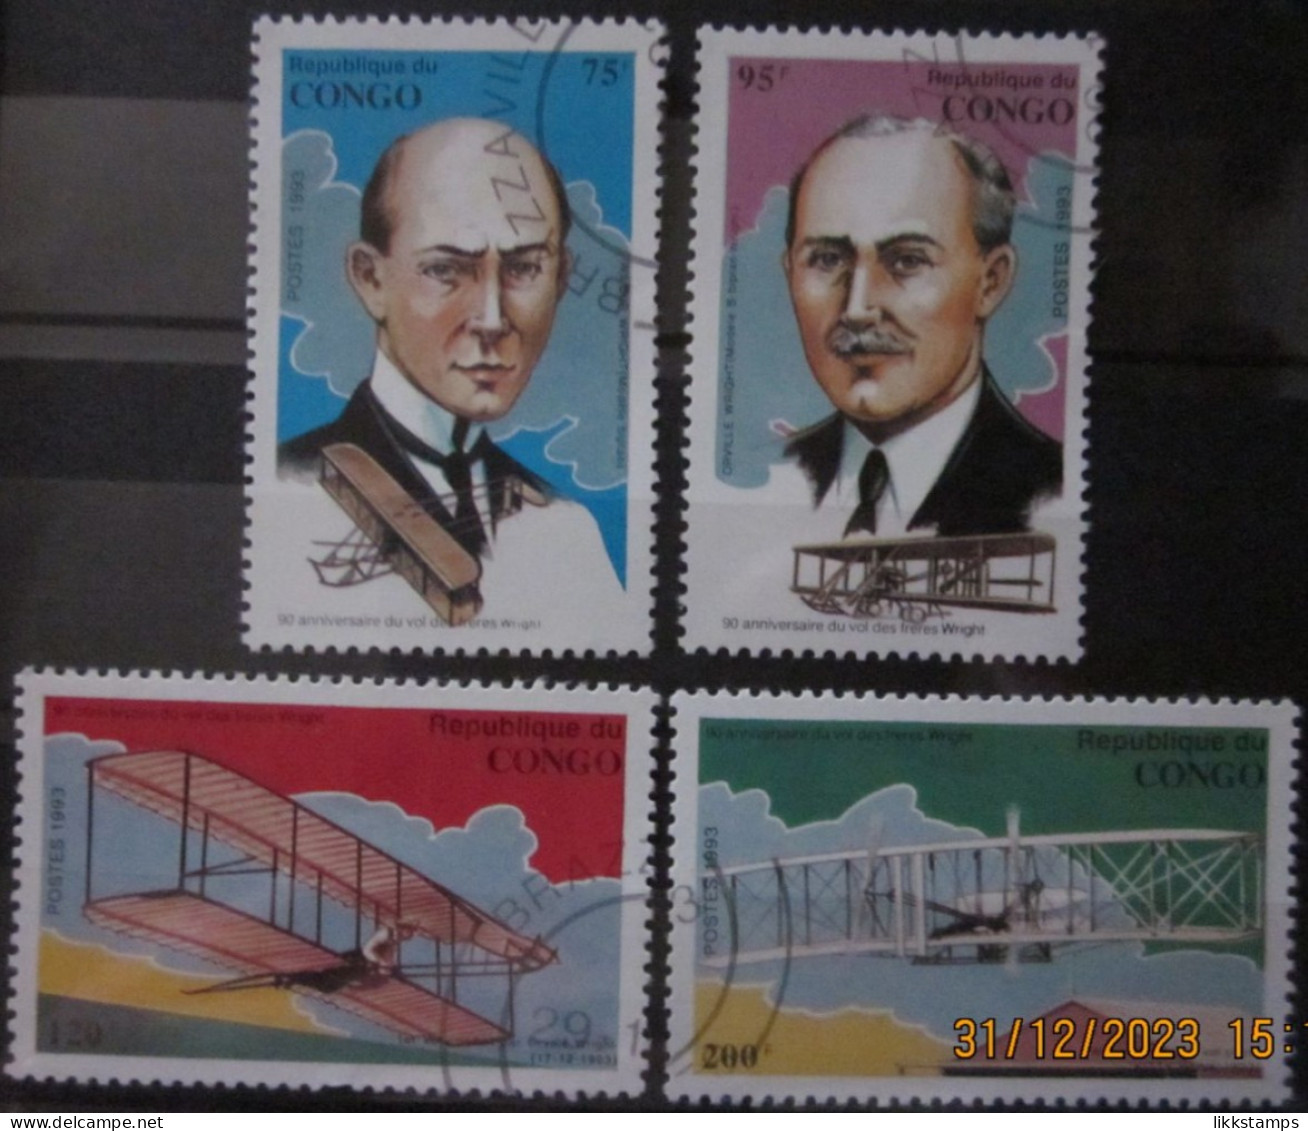 CONGO 17/12/1993 ~ THE 90th ANNIVERSARY OF THE FIRST POWERED FLIGHT. ~  VFU #03087 - Usados